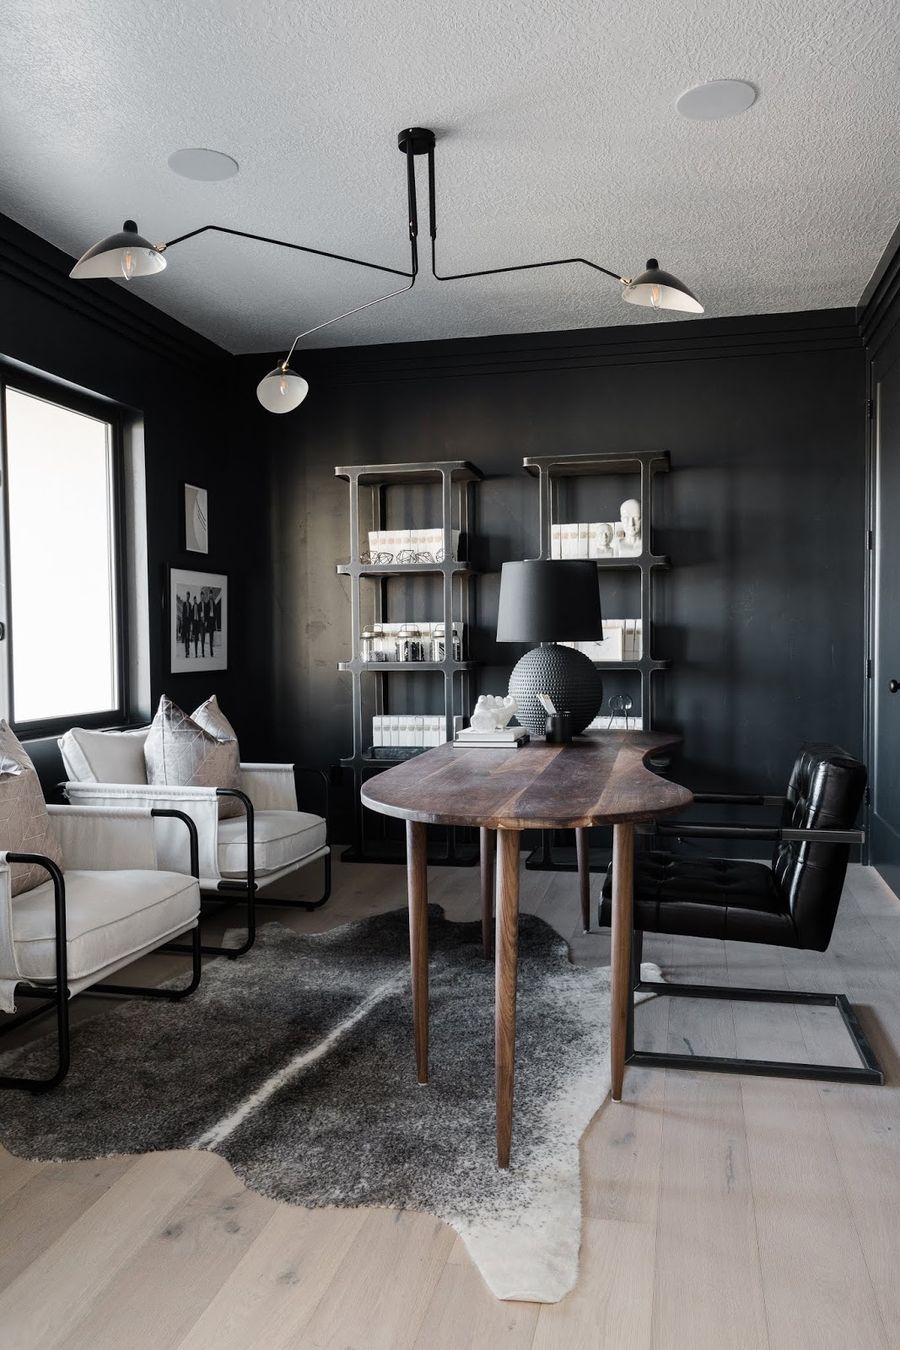 Black Leather Office Chair in Industrial Home Office via theredclosetdiary